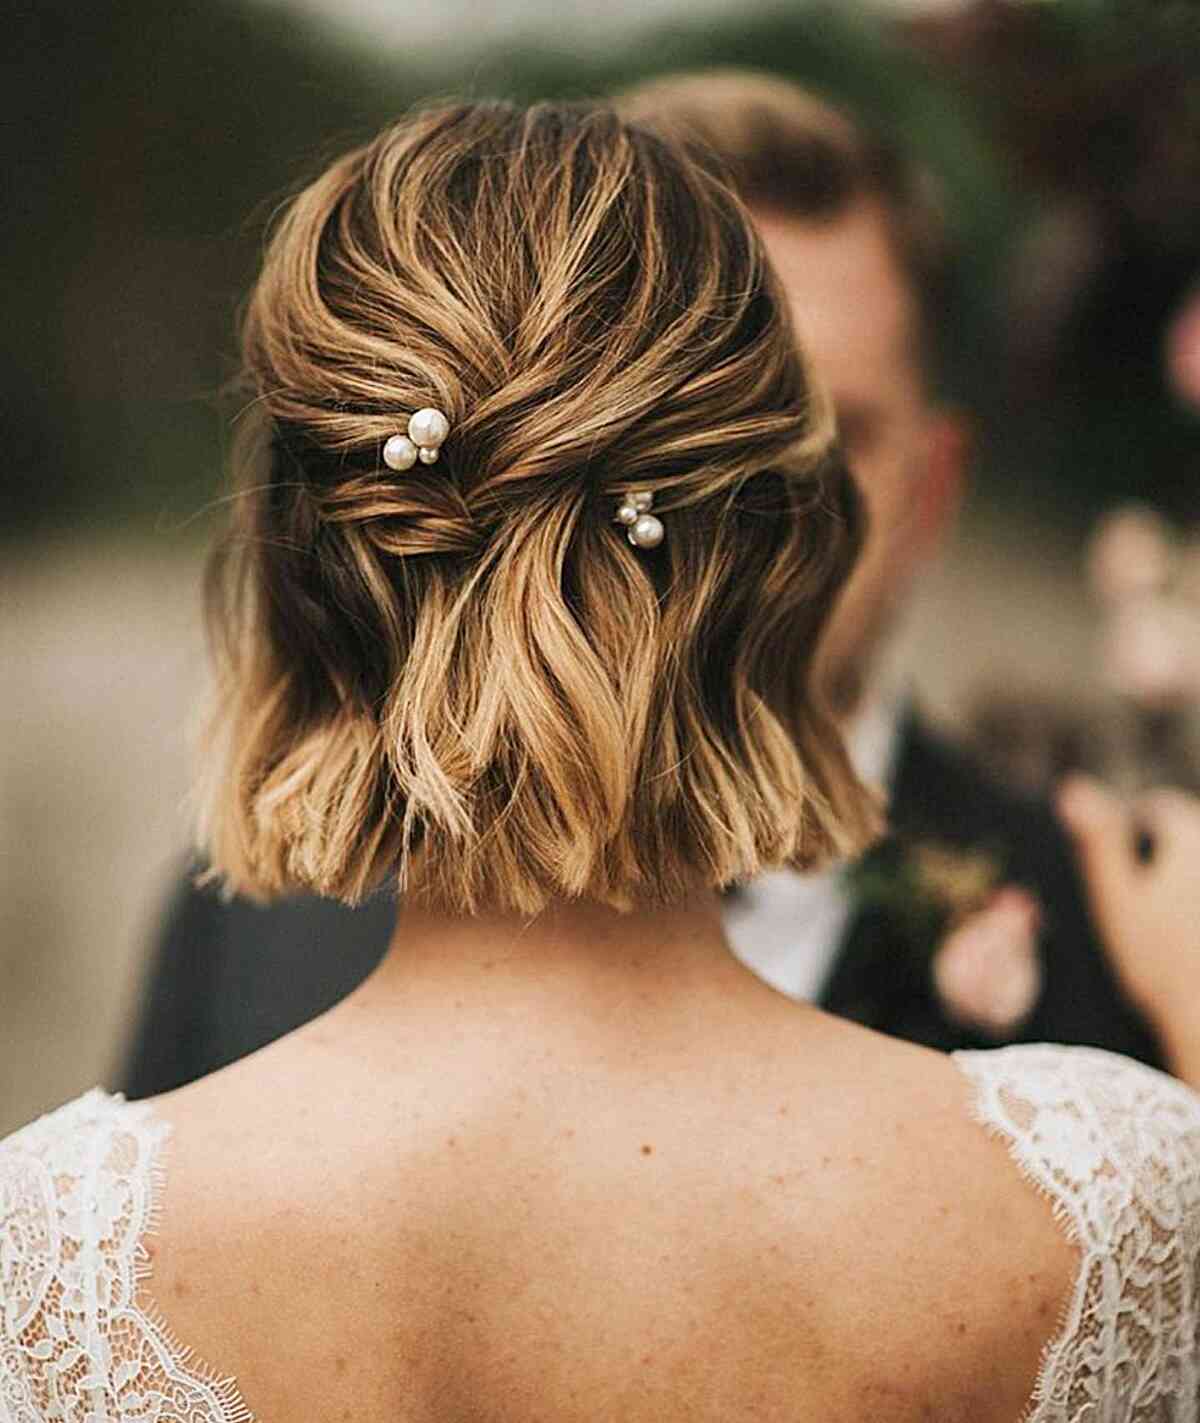 How To Dress Up A Bob Hairstyle For A Wedding | Cliphair US